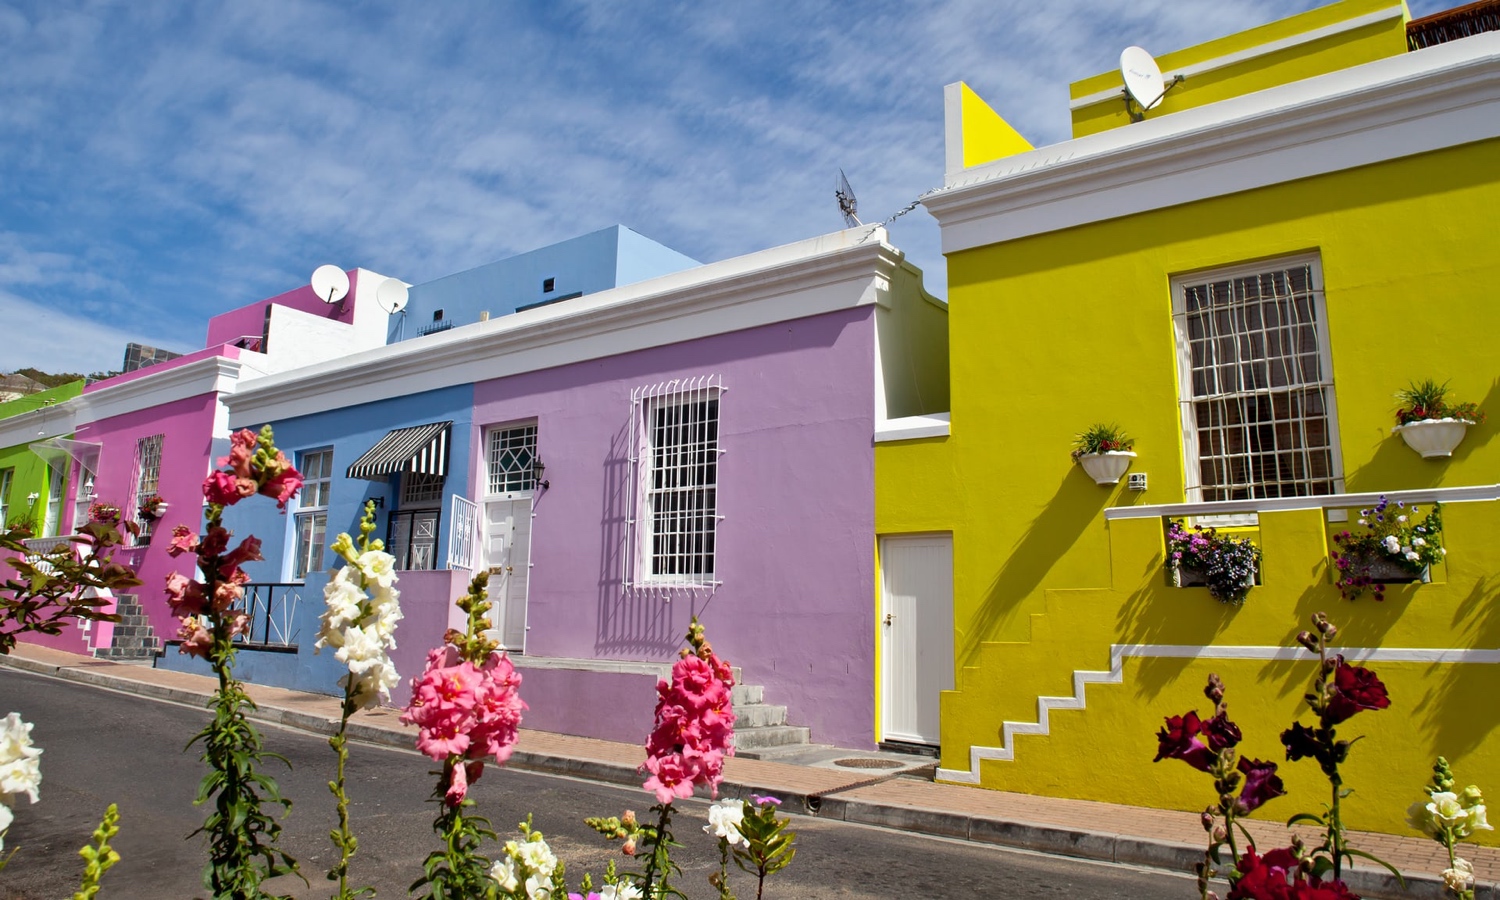 Colourful homes in the desirable district of Bo-Kaap, Cape Town, South Africa. Photograph: Anne-Marie Weber/Getty Images